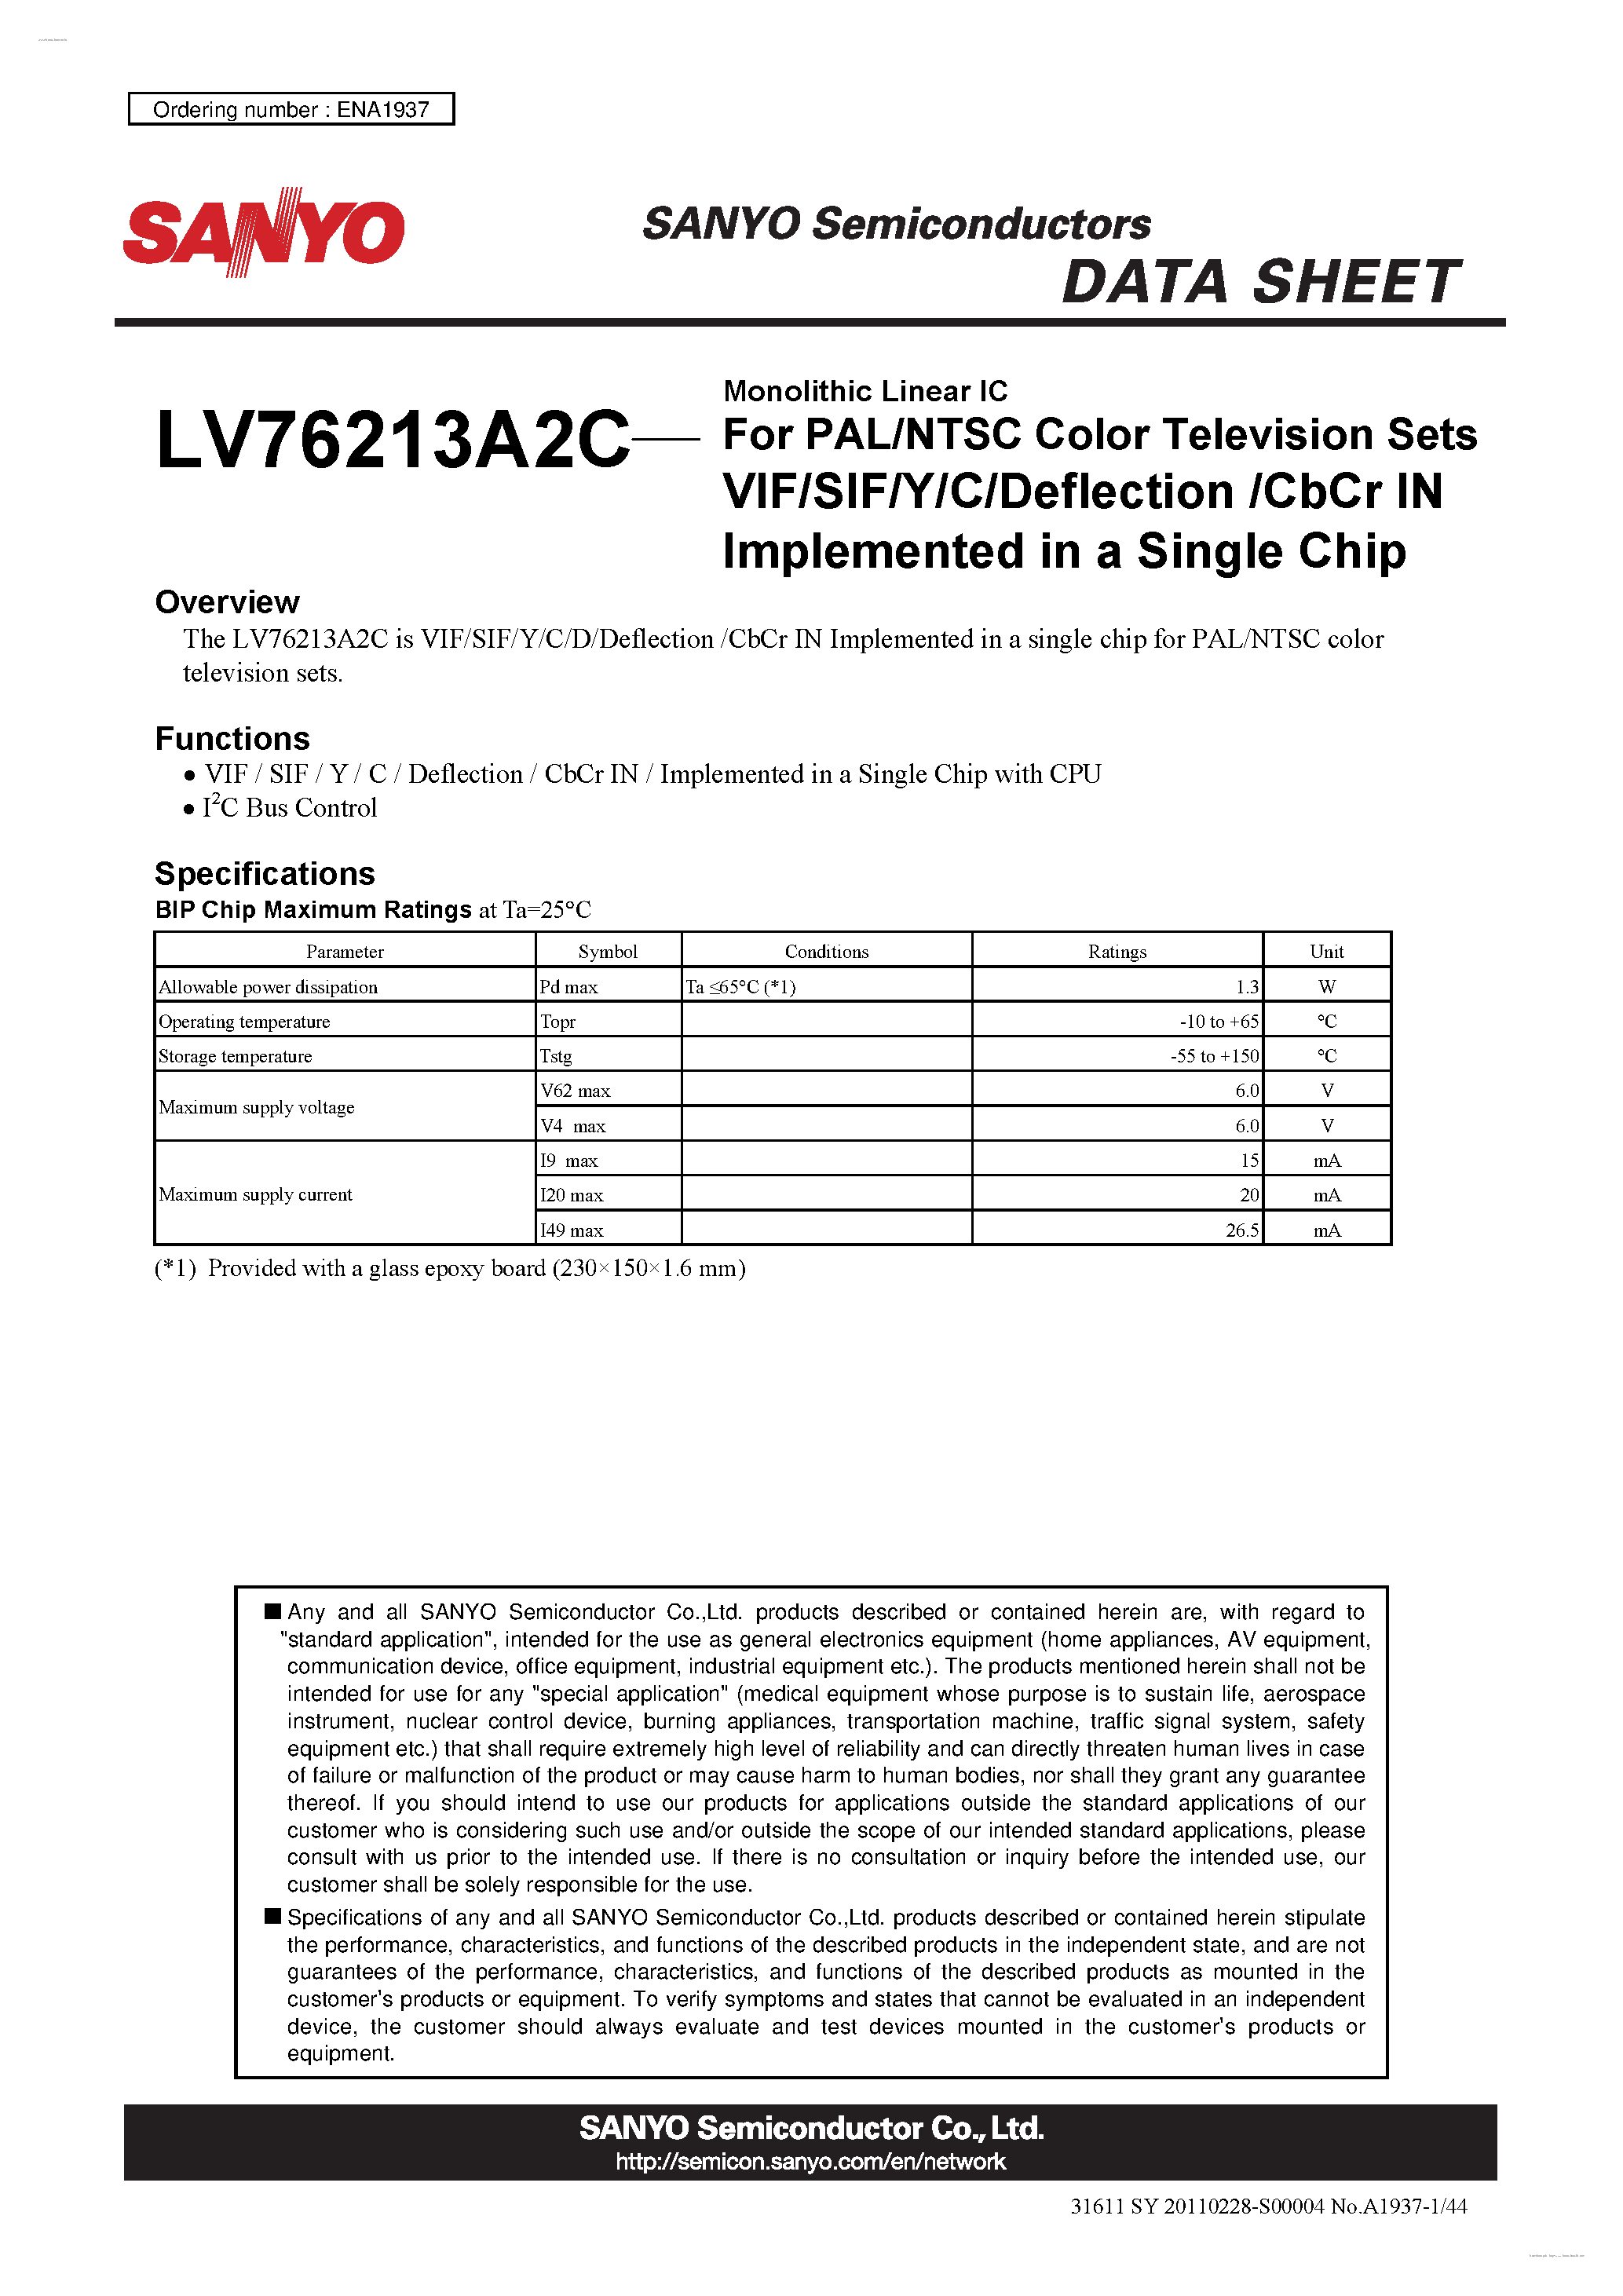 Даташит LV76213A2C - VIF/SIF/Y/C/Deflection /CbCr IN Implemented in a Single Chip страница 1